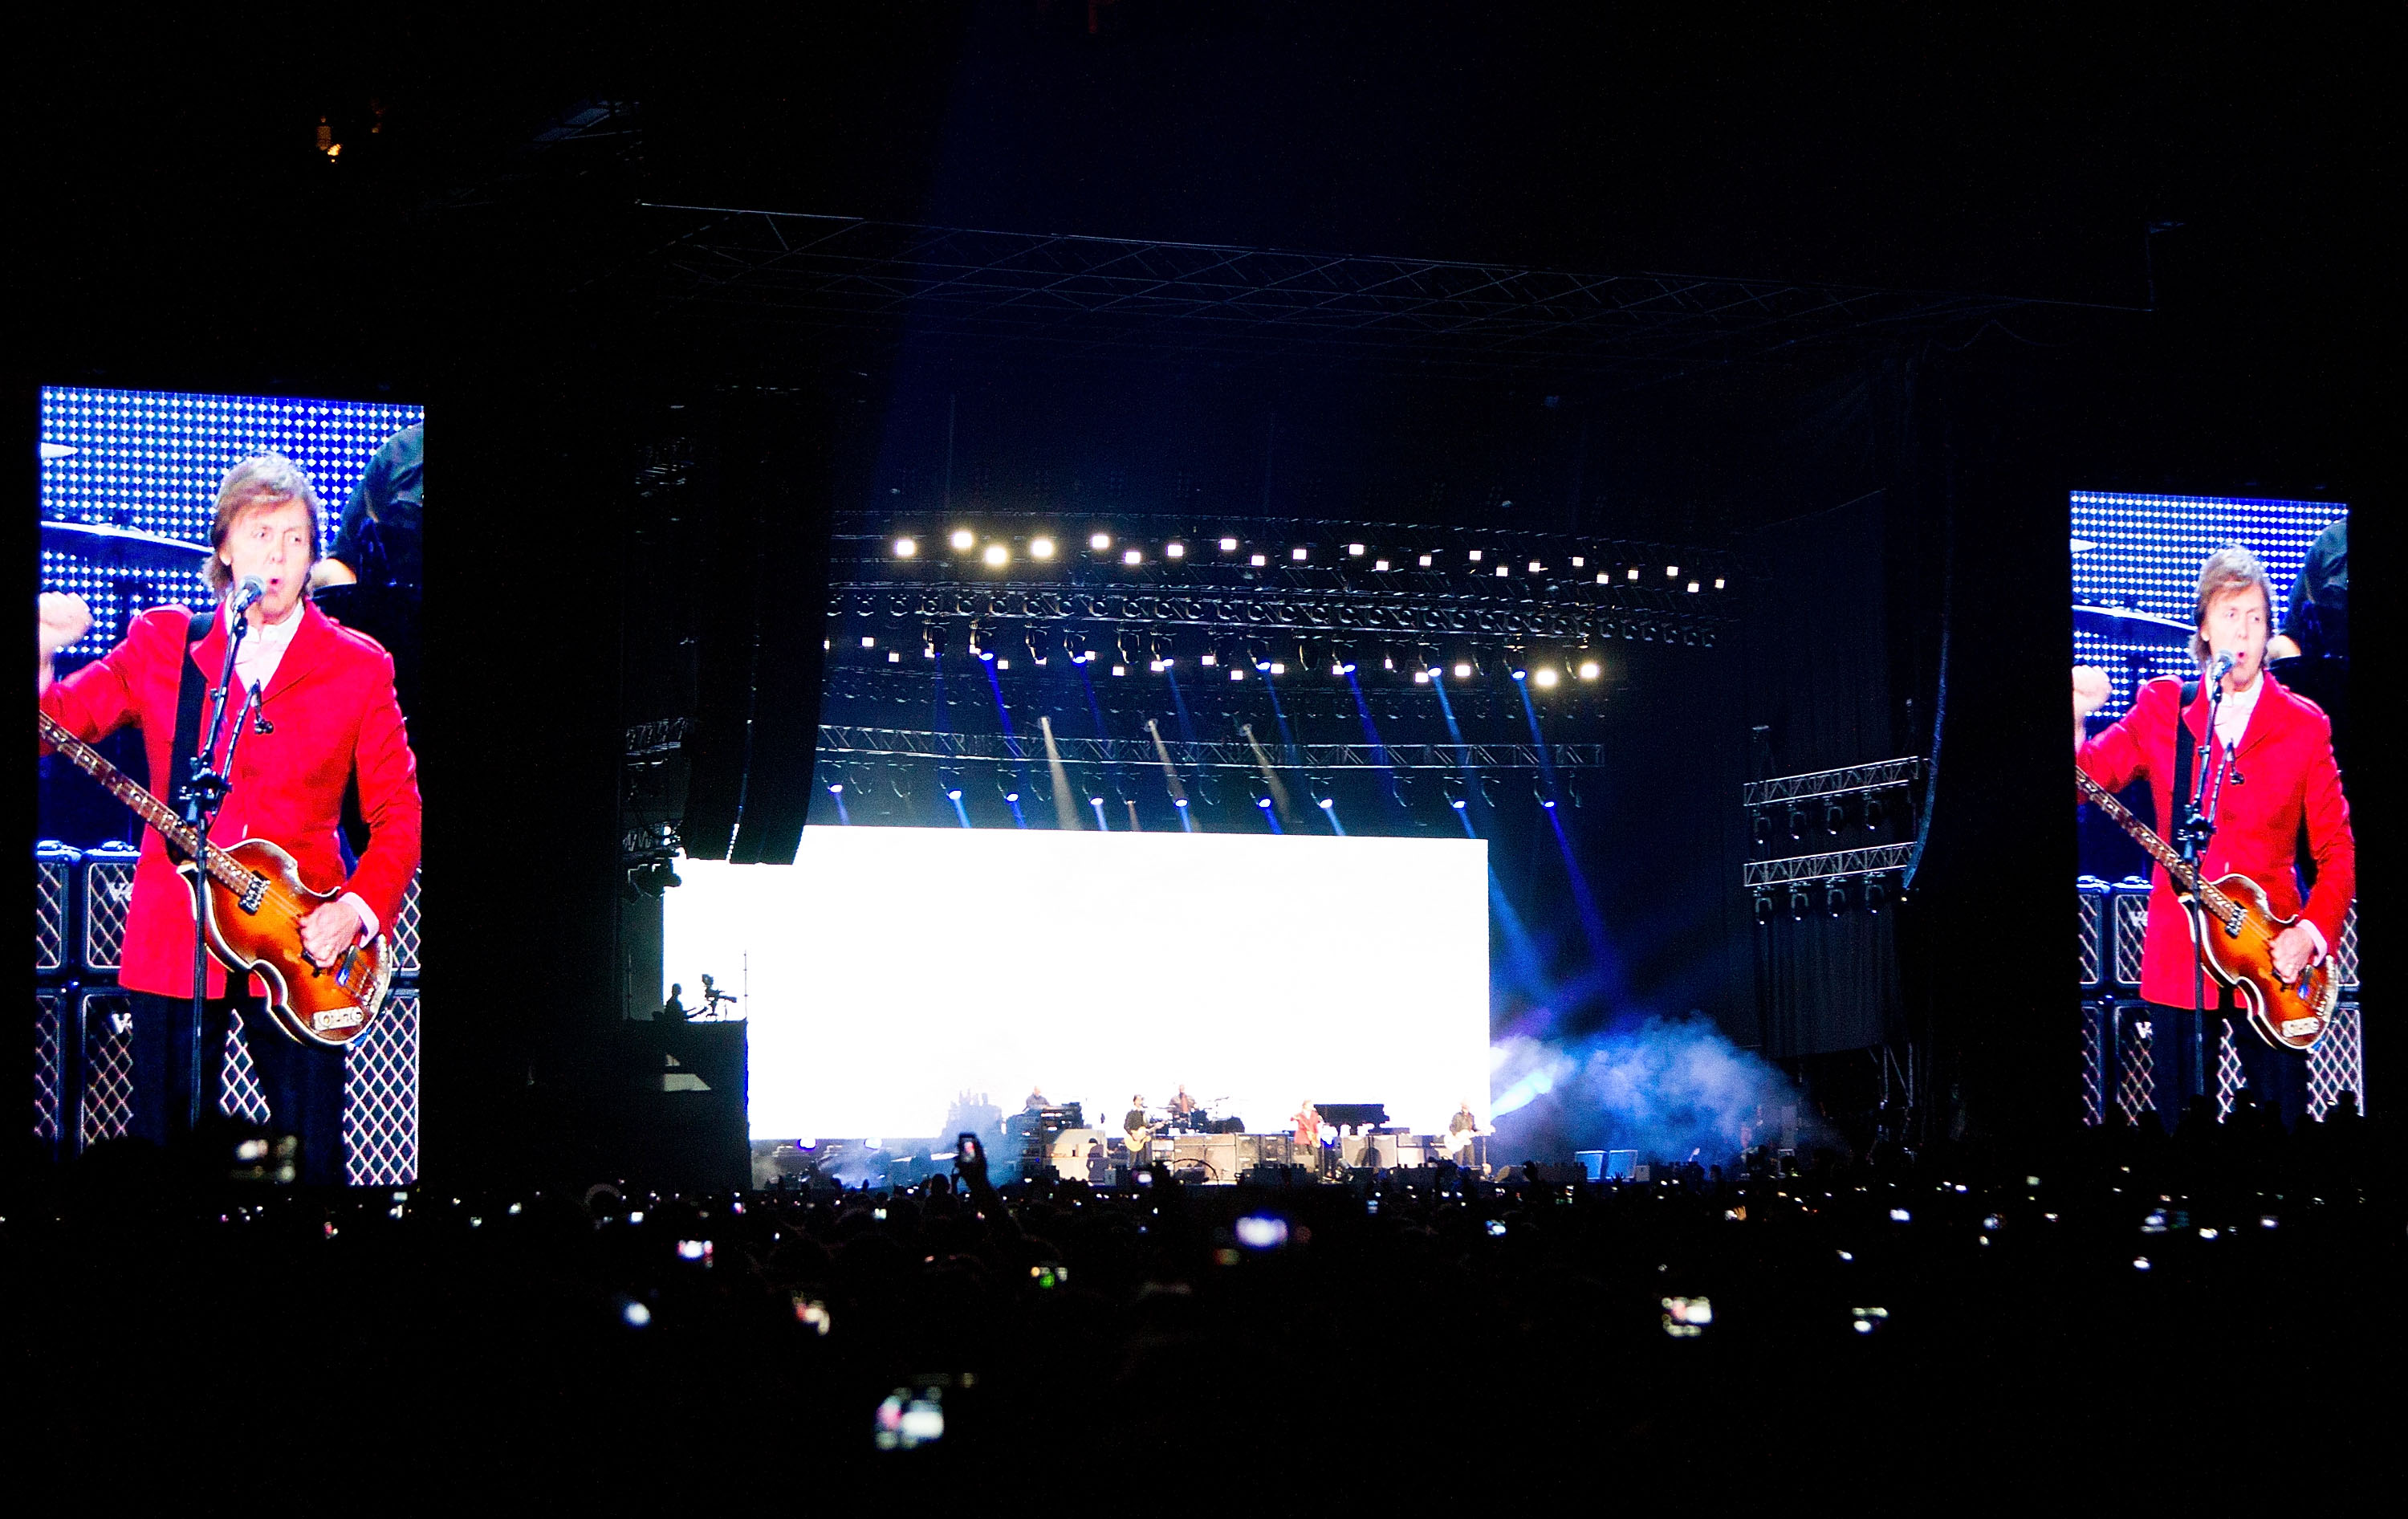 The day Paul McCartney sang for almost 200 thousand people in Mexico